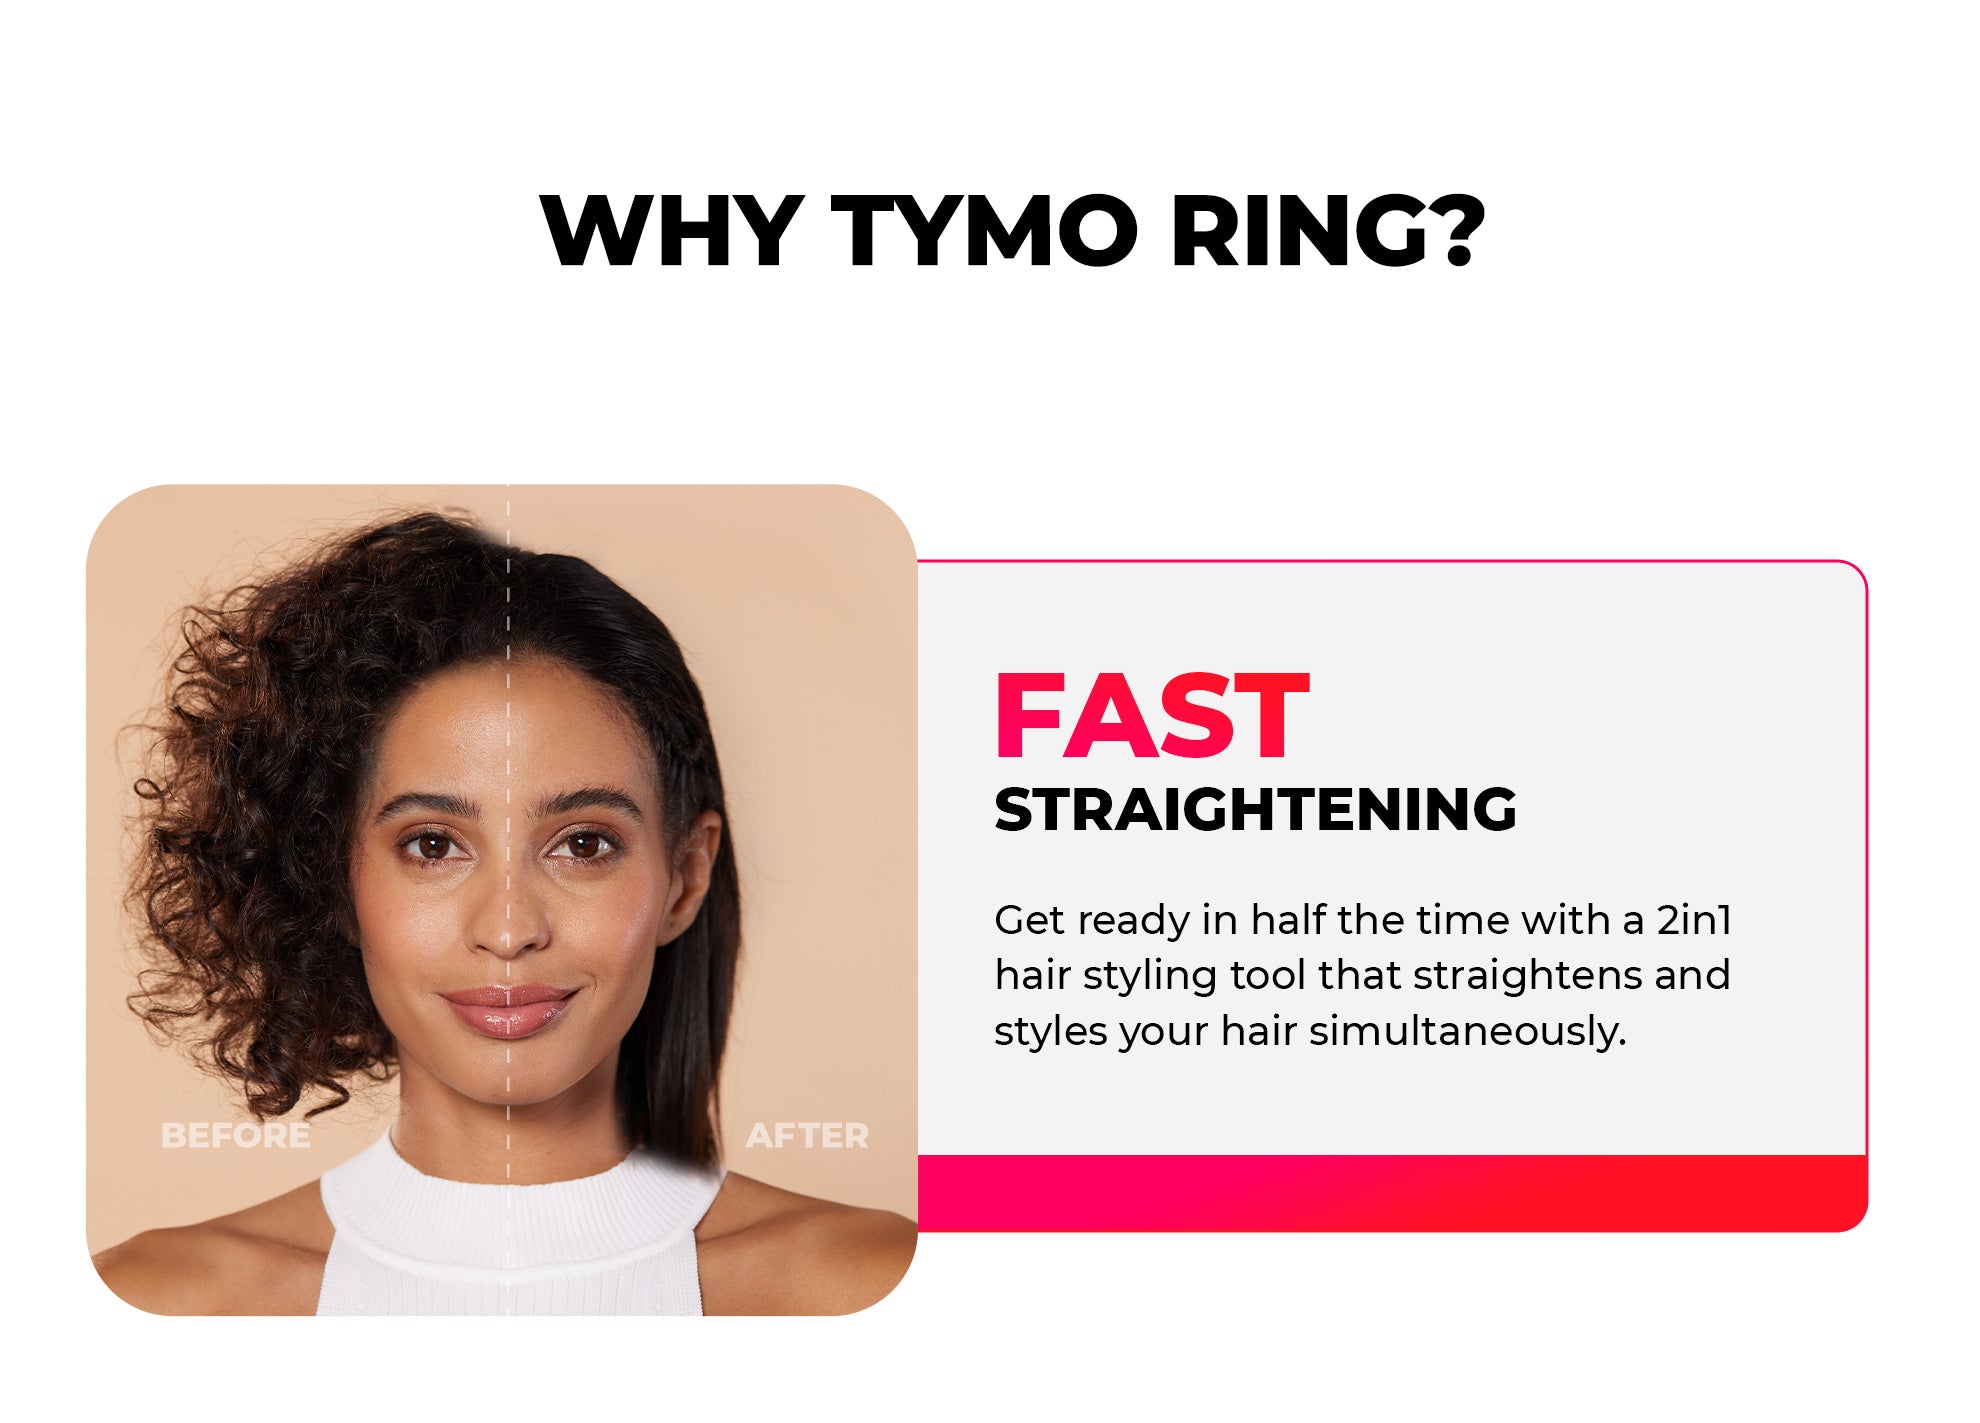 Fast straightening with TYMO hair styling tool, transforming curly hair to sleek straight hair in half the time.